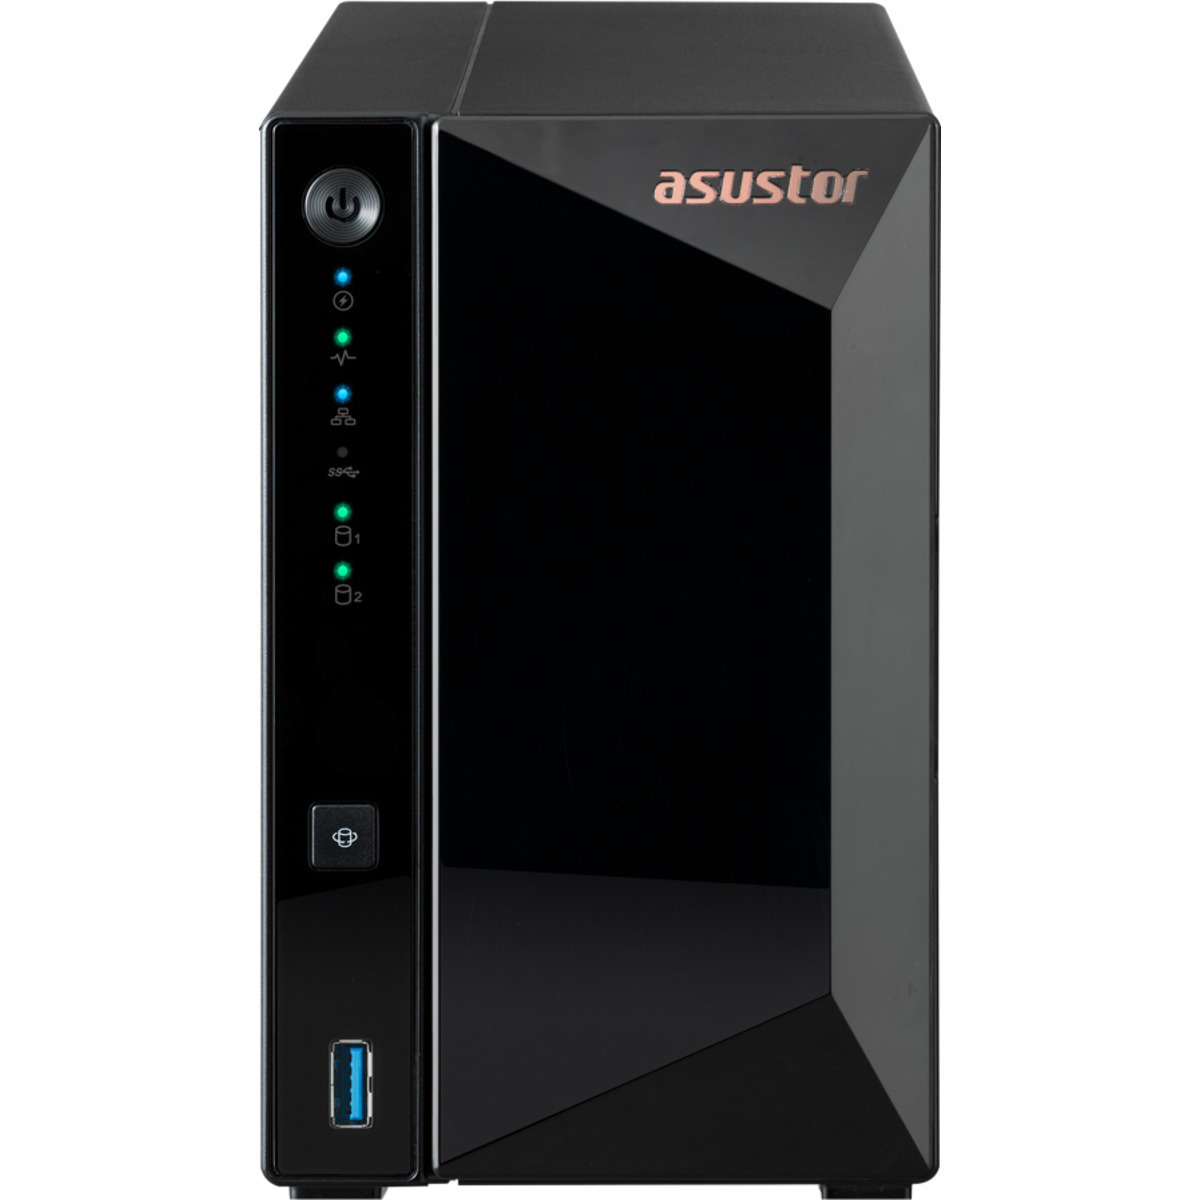 ASUSTOR DRIVESTOR 2 Pro AS3302T 12tb 2-Bay Desktop Personal / Basic Home / Small Office NAS - Network Attached Storage Device 2x6tb Seagate IronWolf Pro ST6000NT001 3.5 7200rpm SATA 6Gb/s HDD NAS Class Drives Installed - Burn-In Tested DRIVESTOR 2 Pro AS3302T